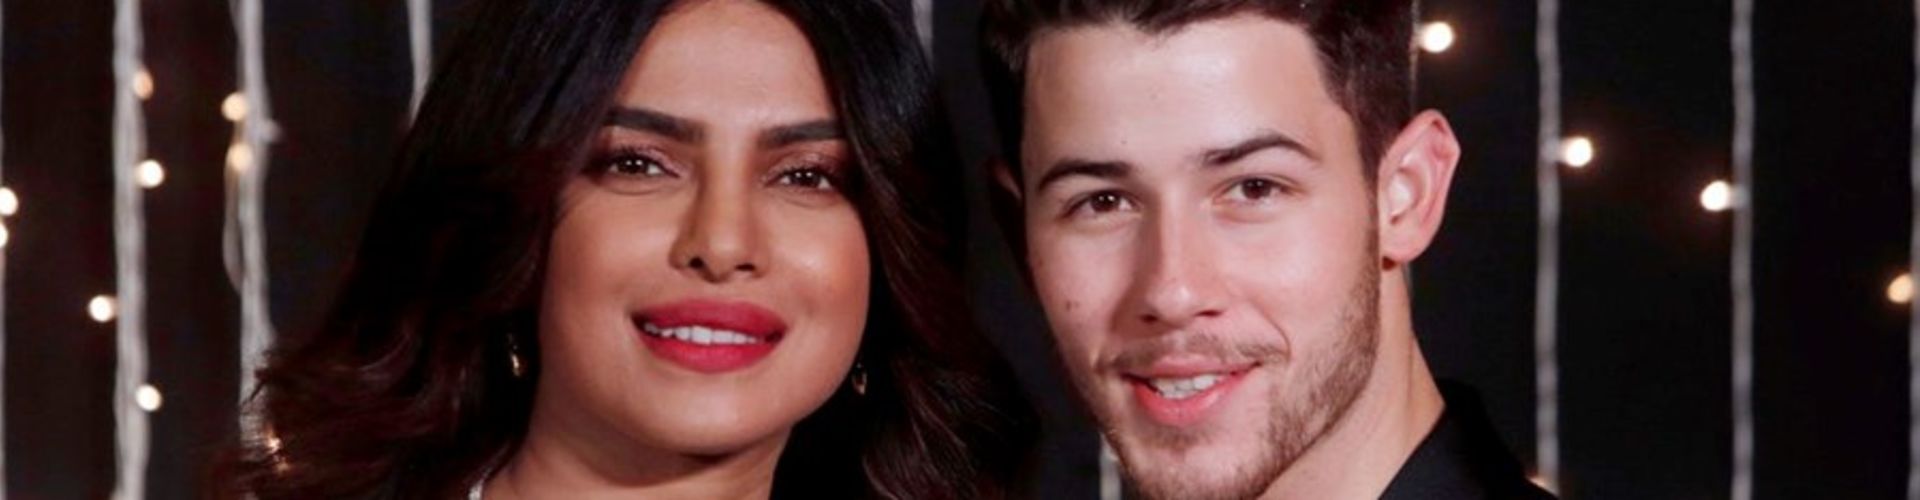 Priyanka Chopra and her husband Nick win hearts as they donate for Assam and Bihar floods